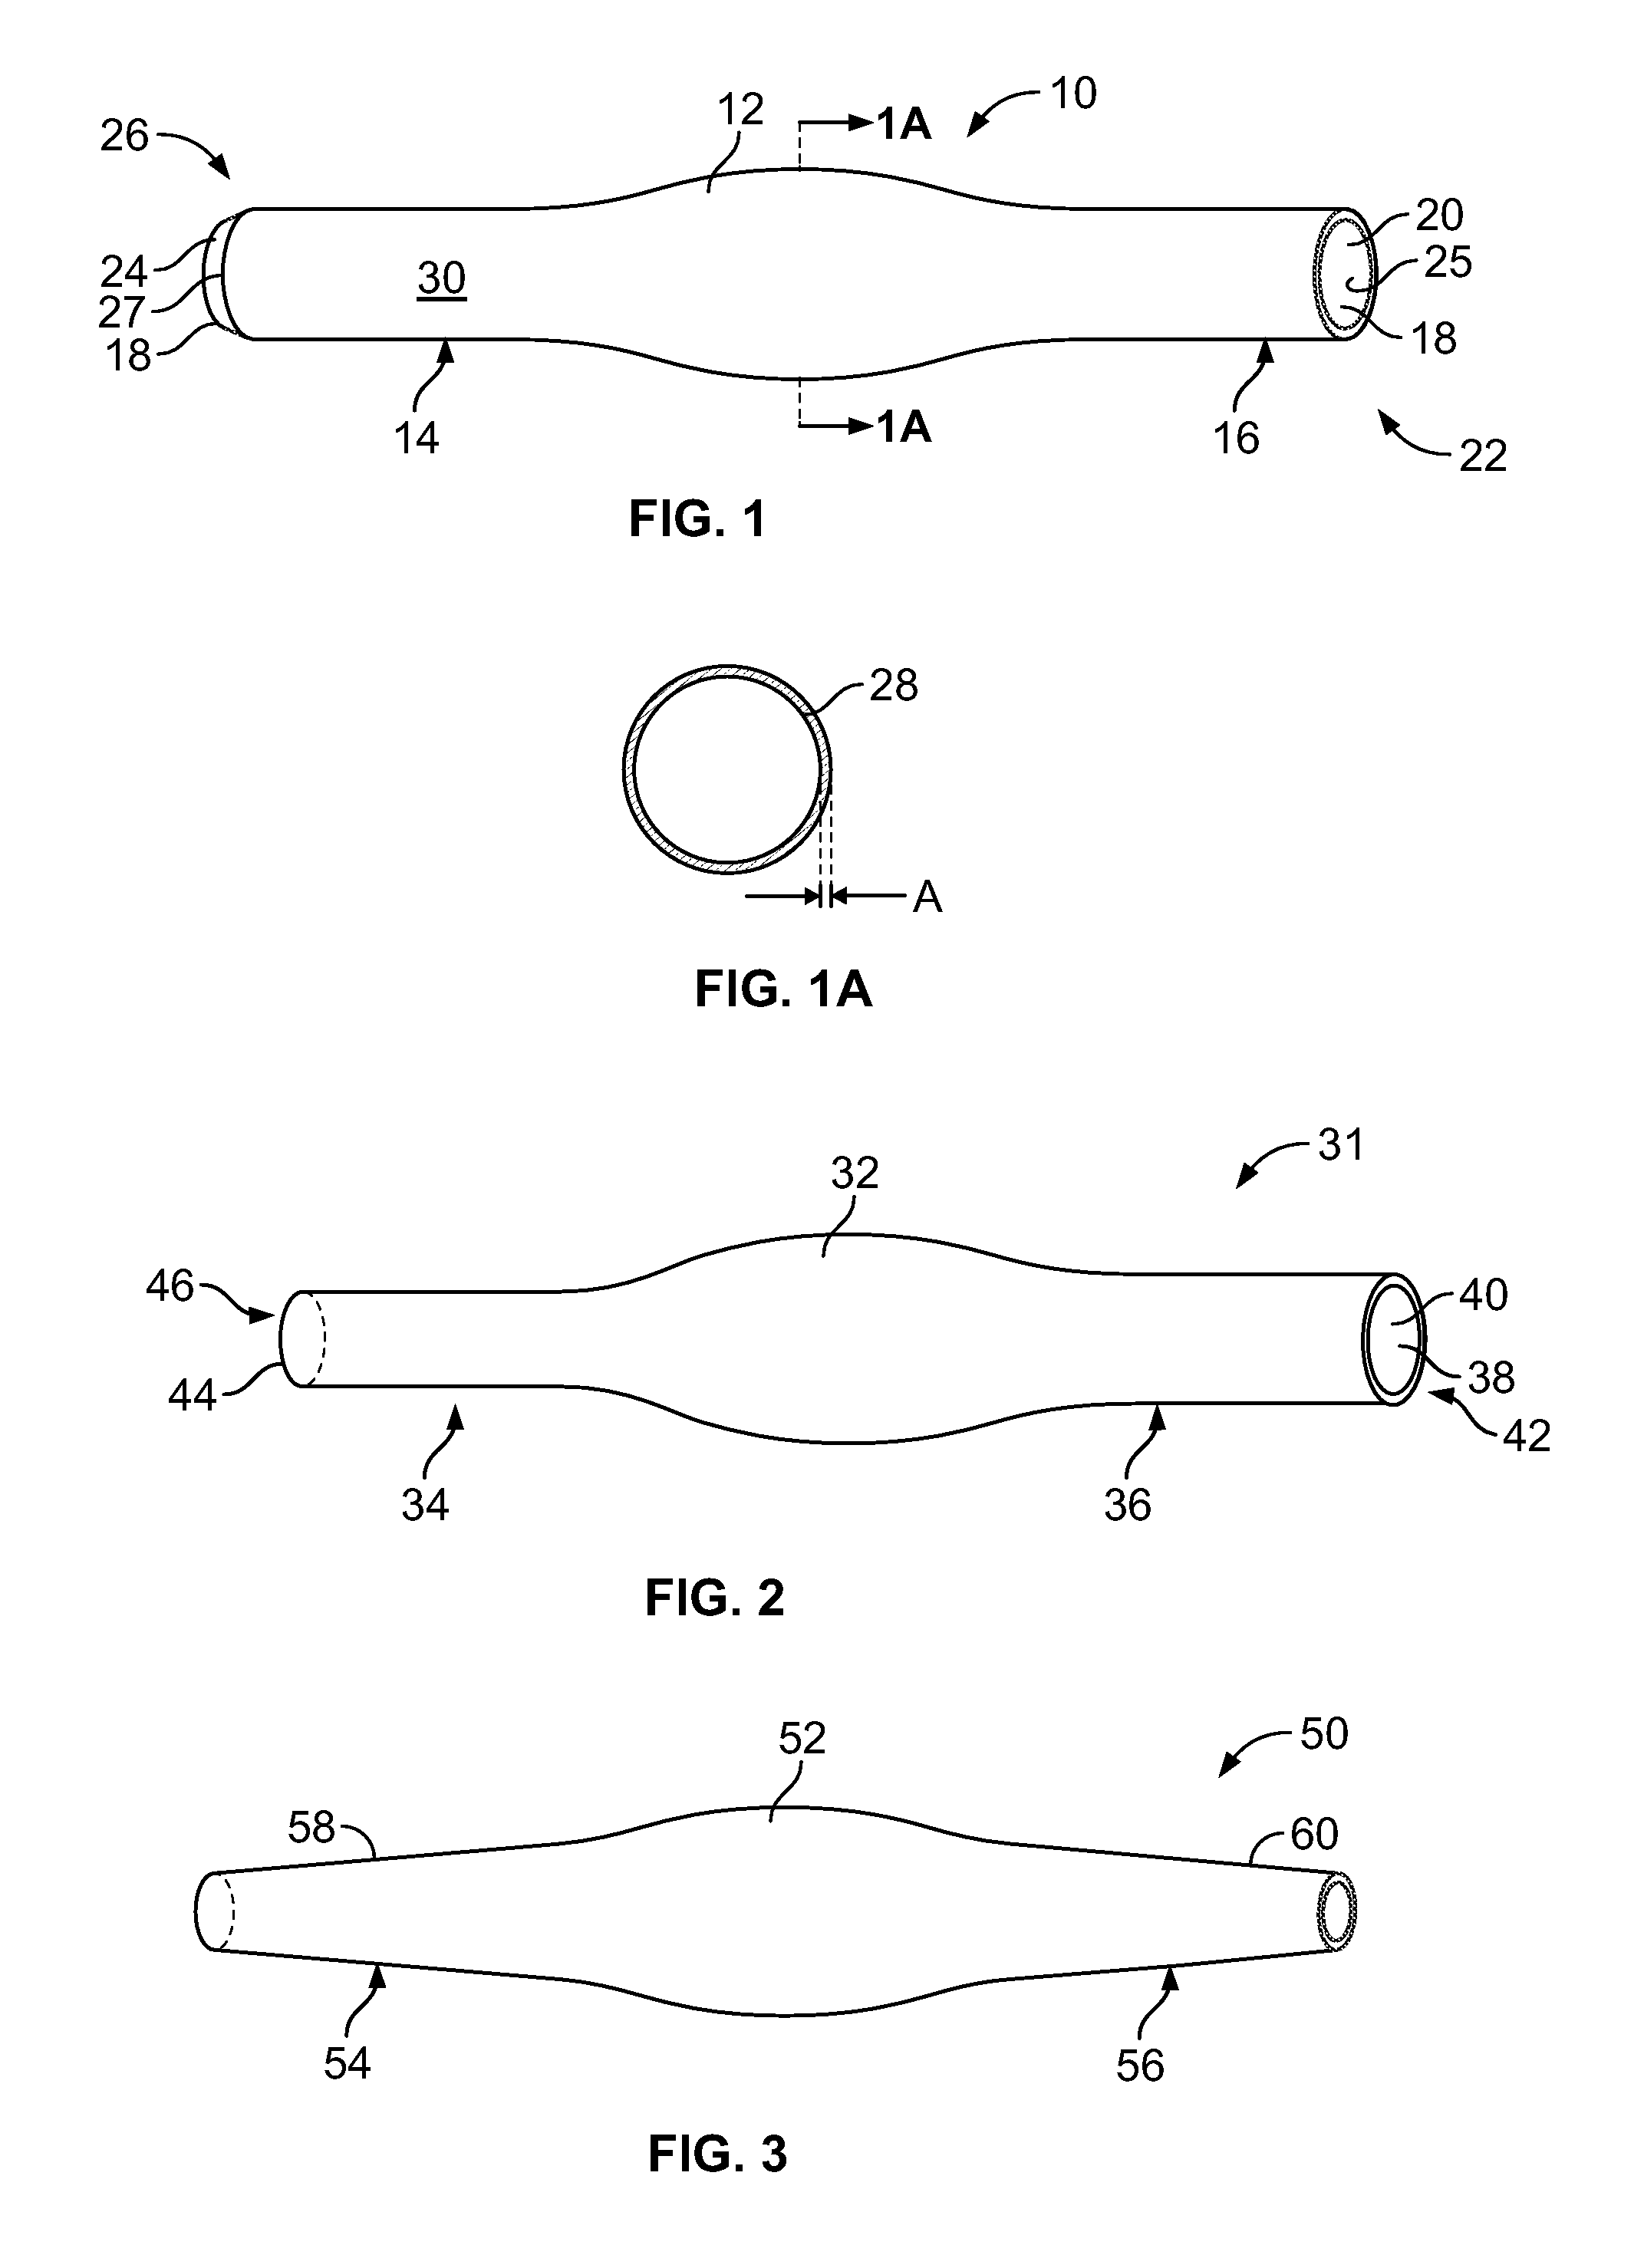 Stent device for anastomoses of blood vessels and other tubular organs